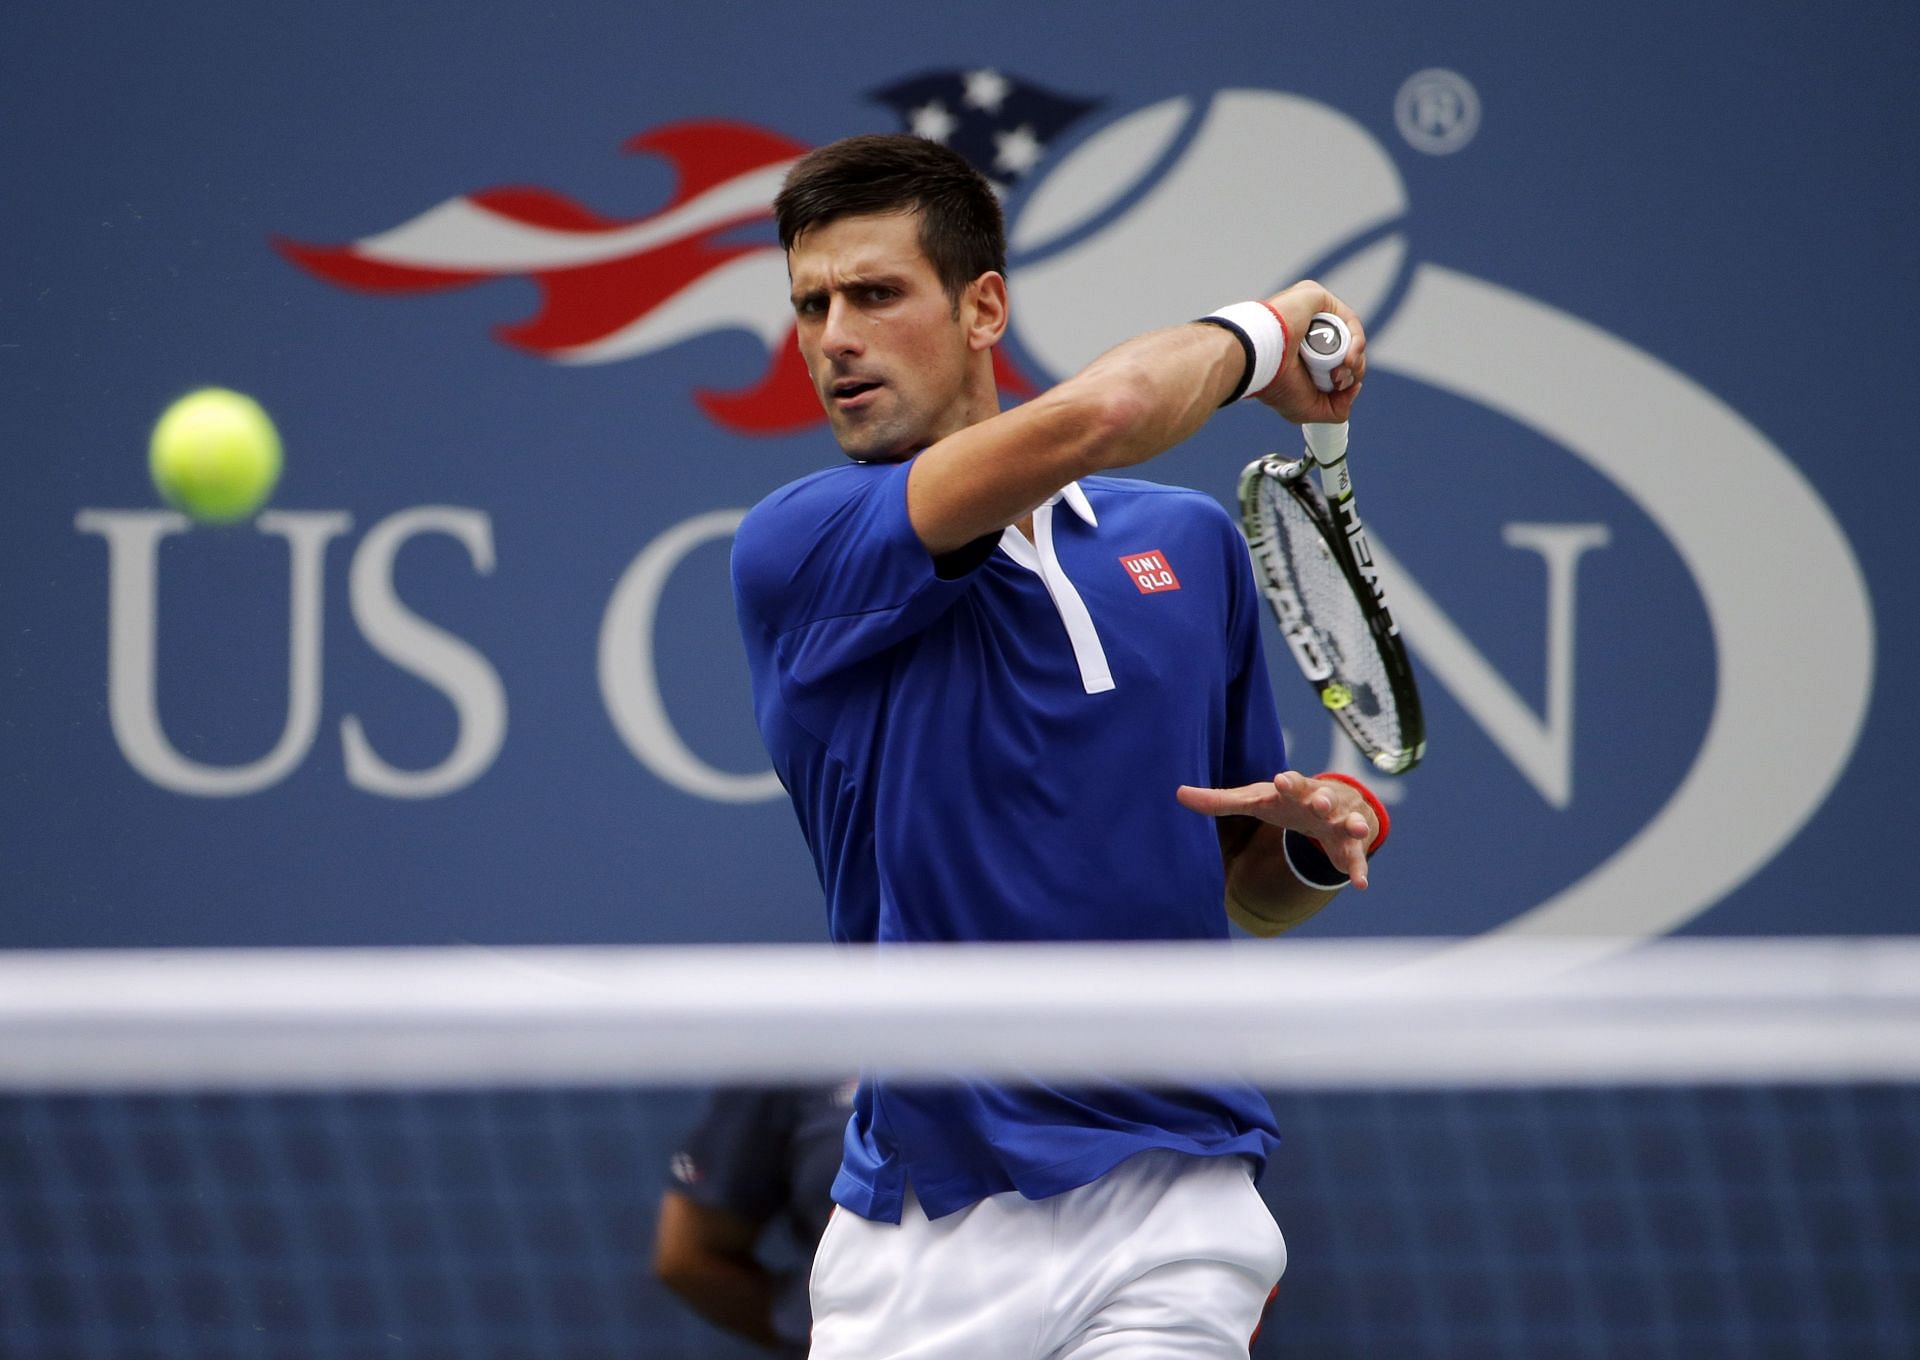 Djokovic is chasing a fourth US Open title this fortnight.